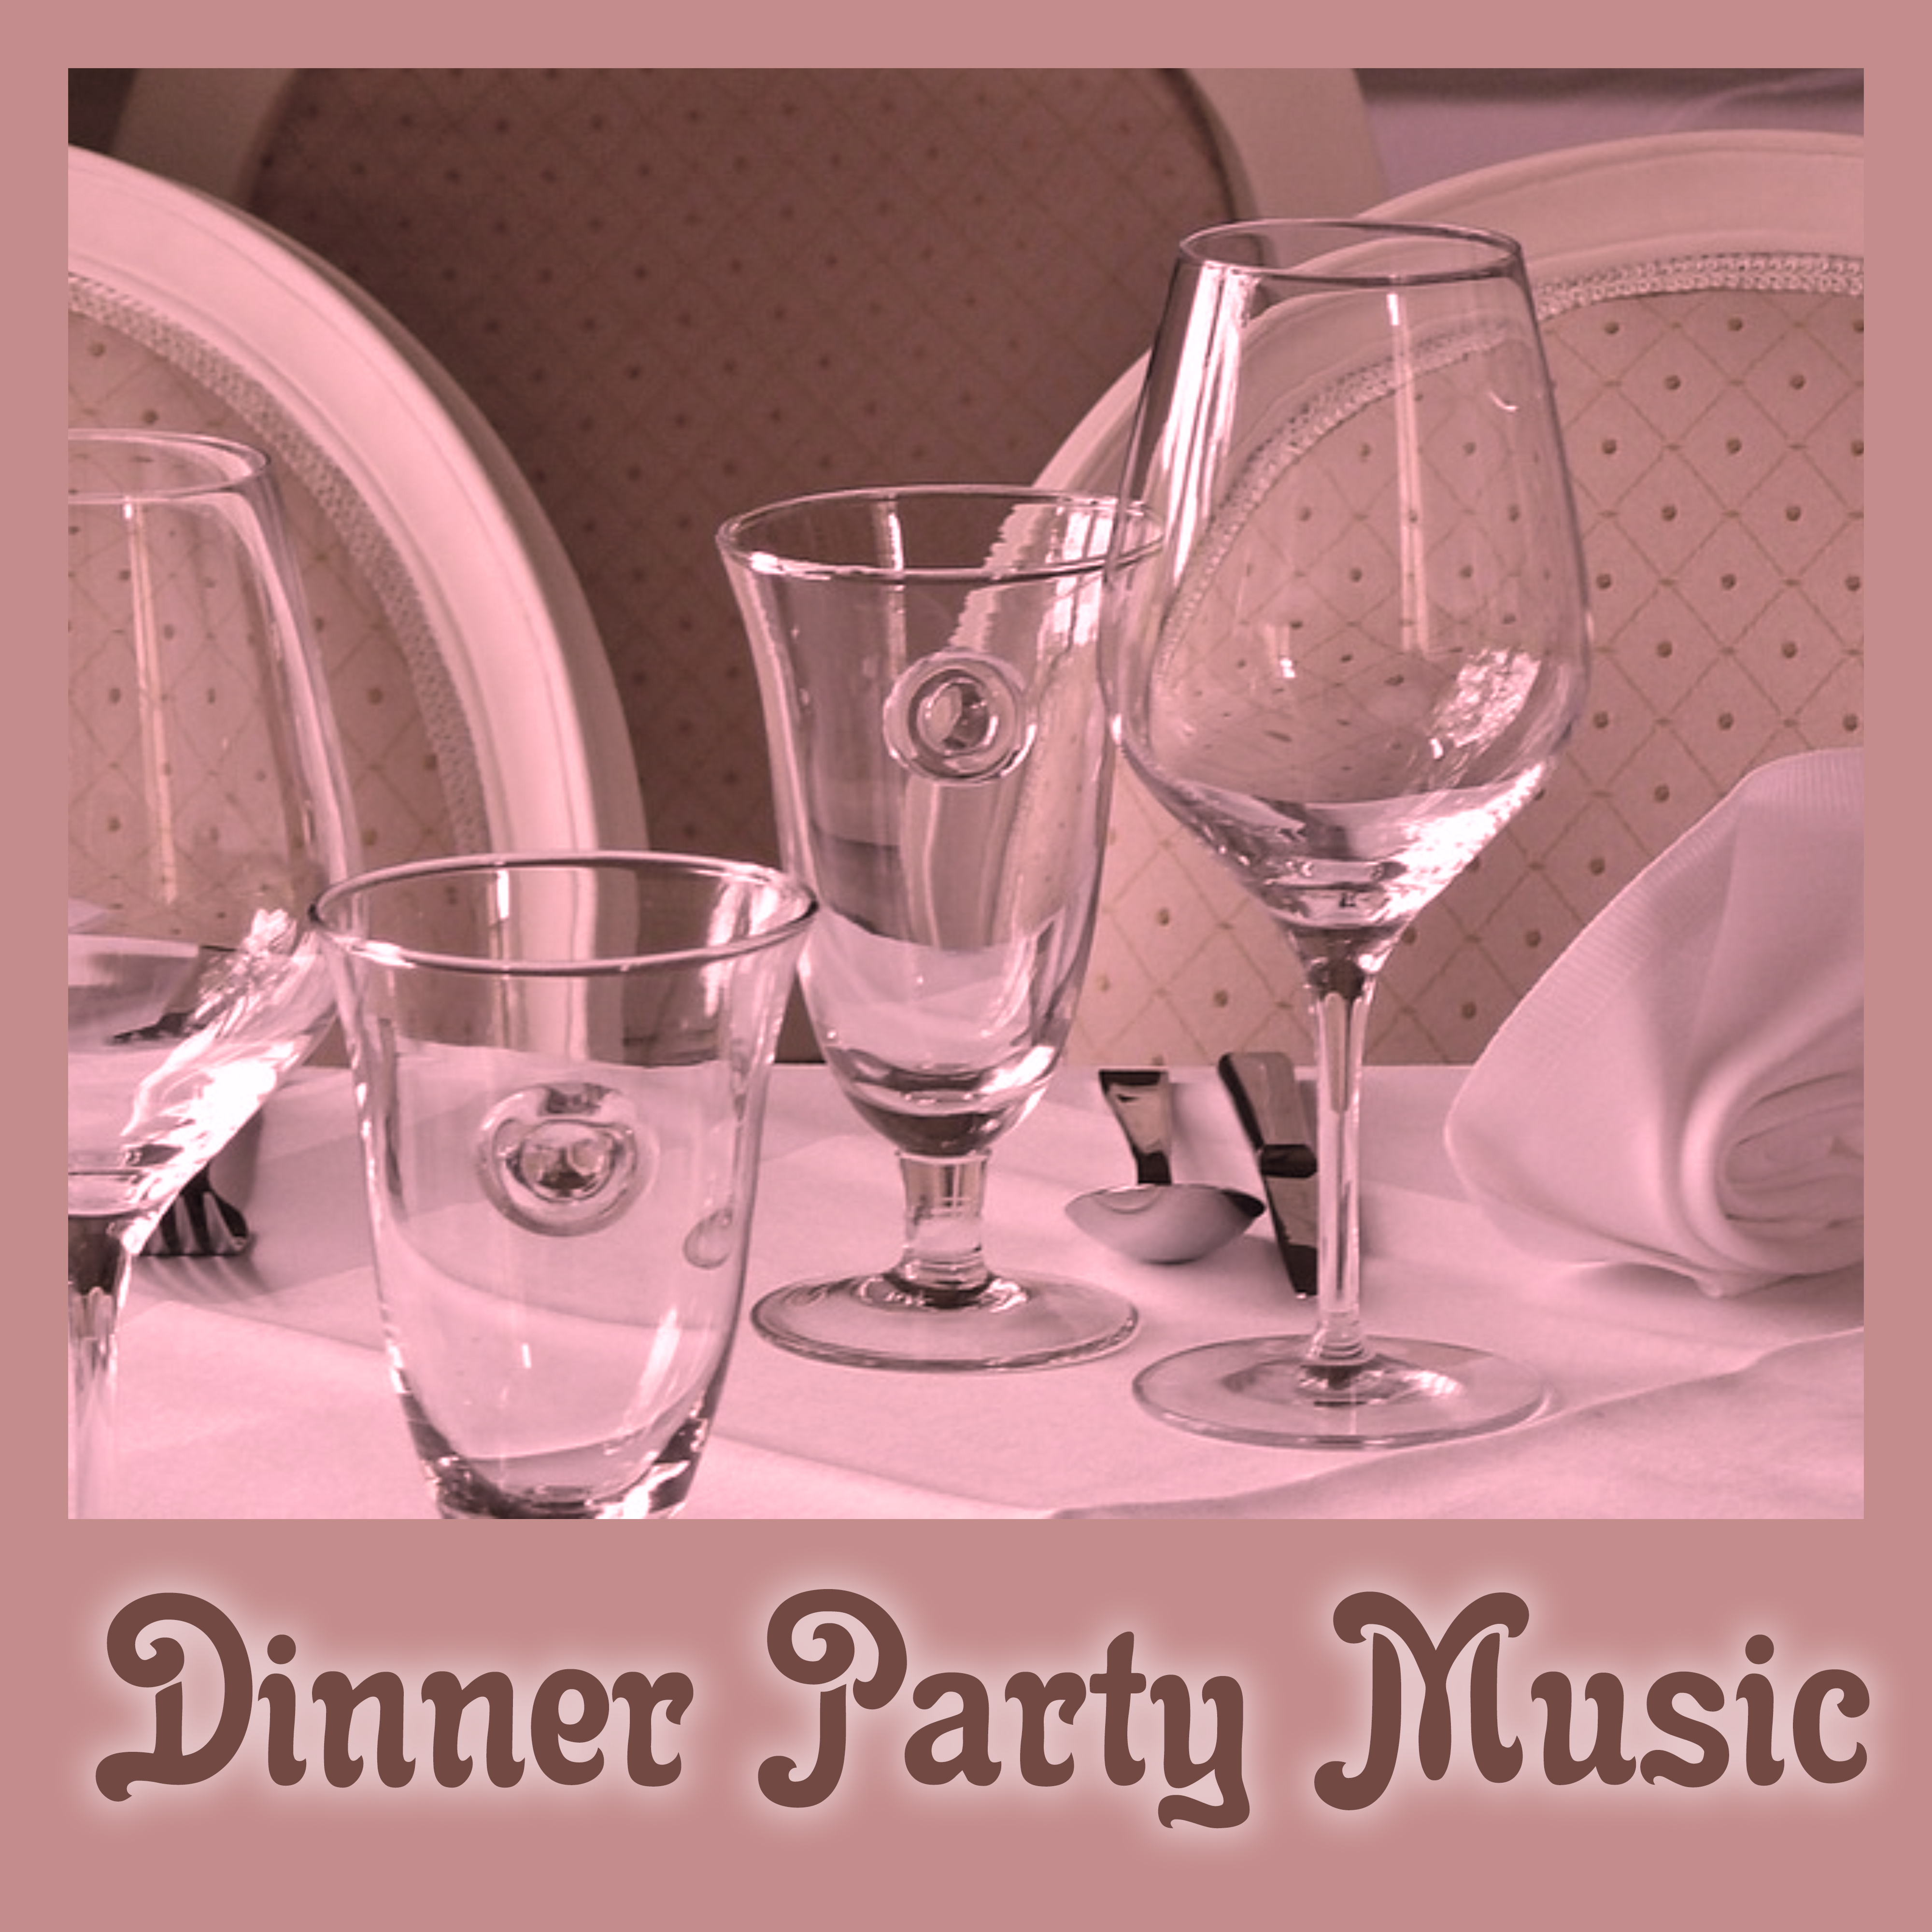 Dinner Party Music  Melow Piano Jazz for Restaurant  Cafe, Jazz Club  Bar, Ambient Instrumental Piano, Instrumental Jazz, Background Music